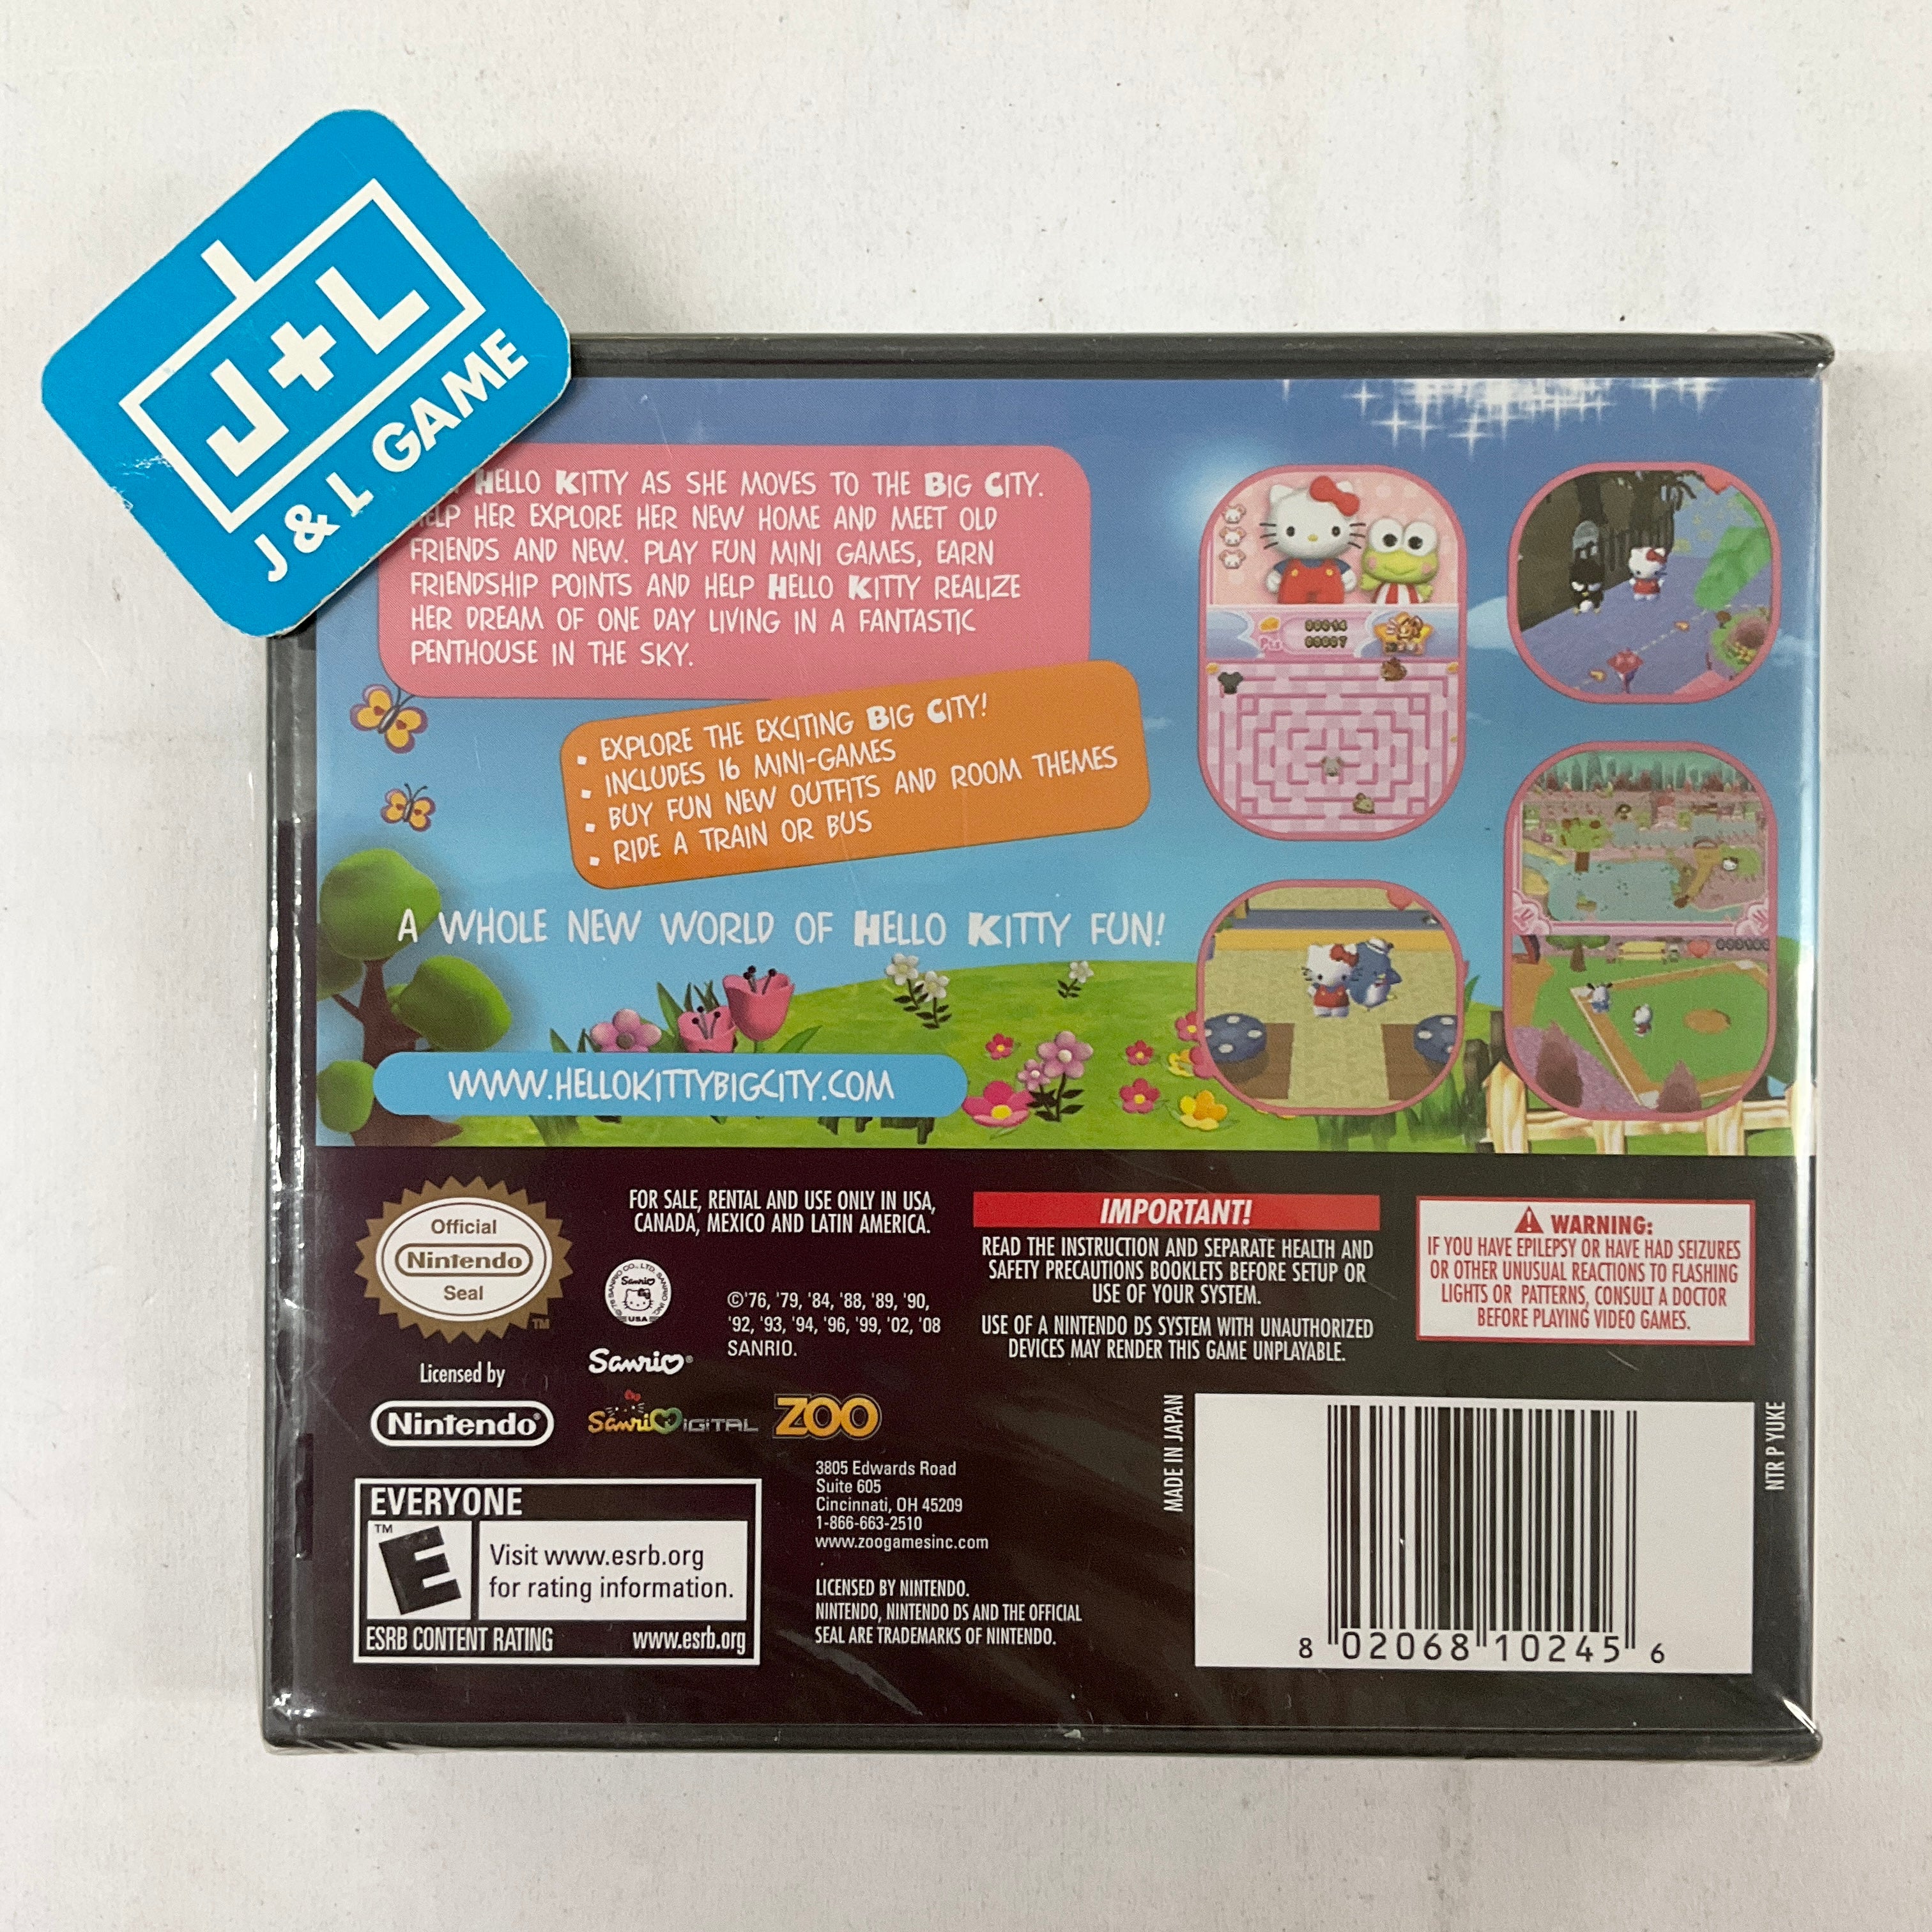 Hello Kitty: Big City Dreams - (NDS) Nintendo DS Video Games Empire Interactive   